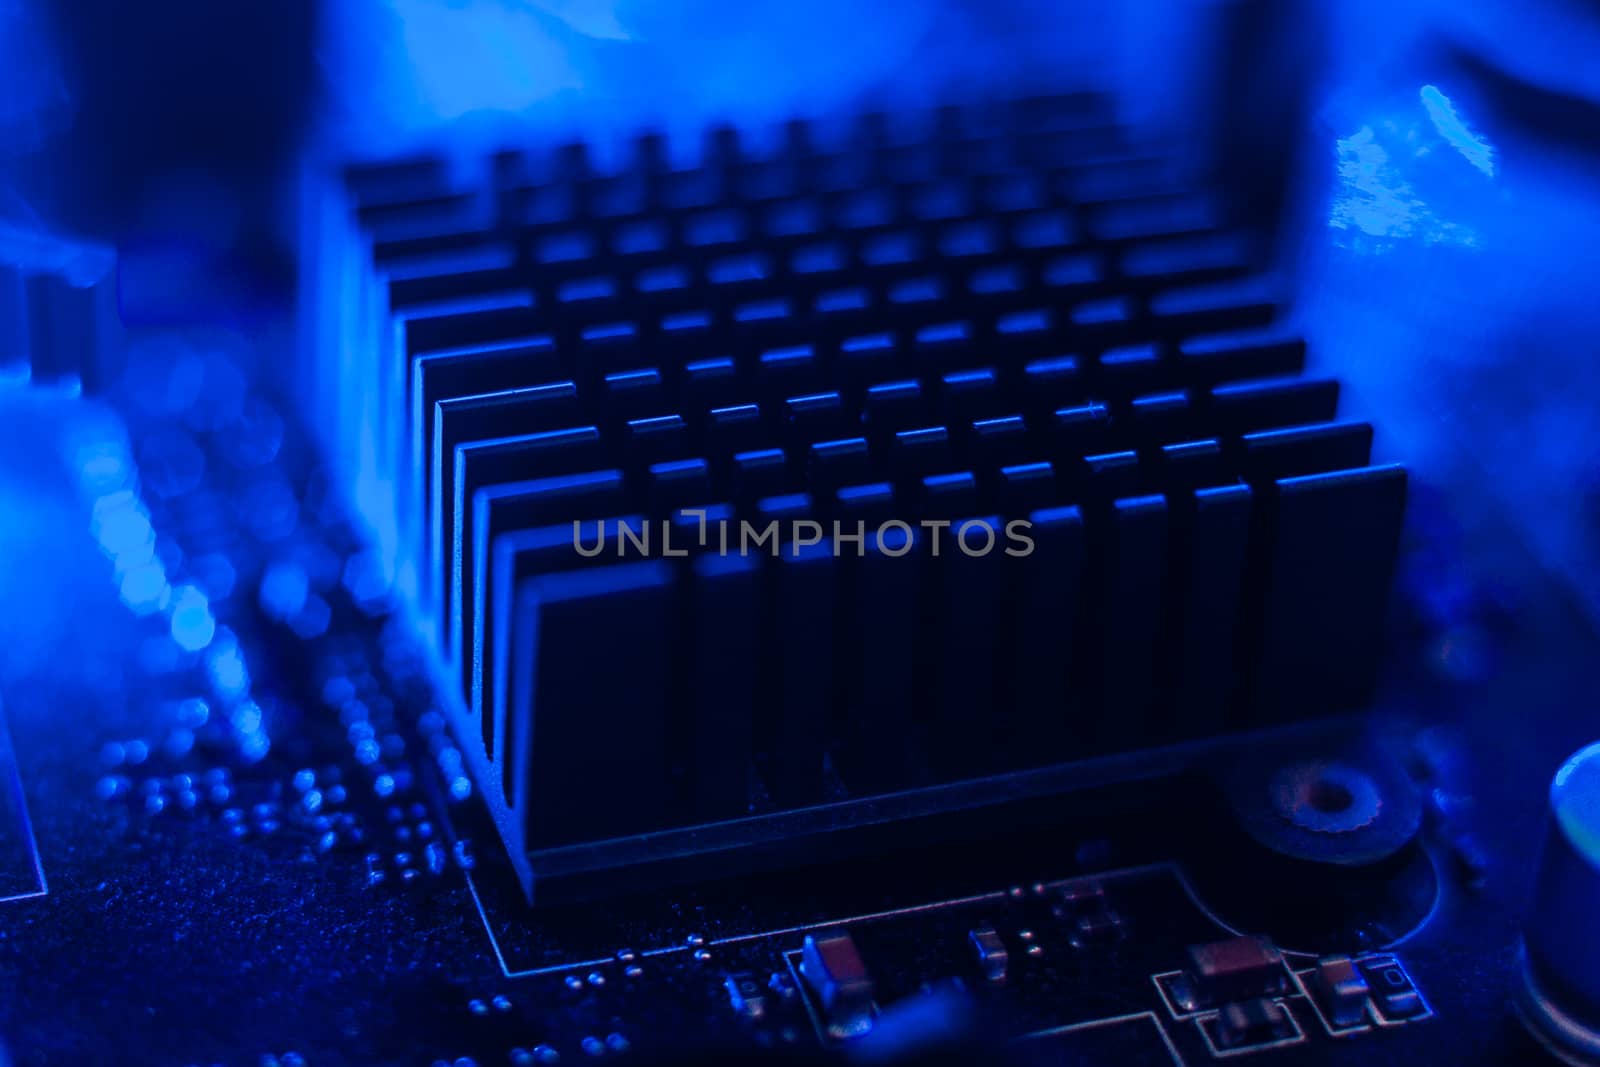 Motherboard radiator with blue backlight. Electronics in neon li by Opikanets